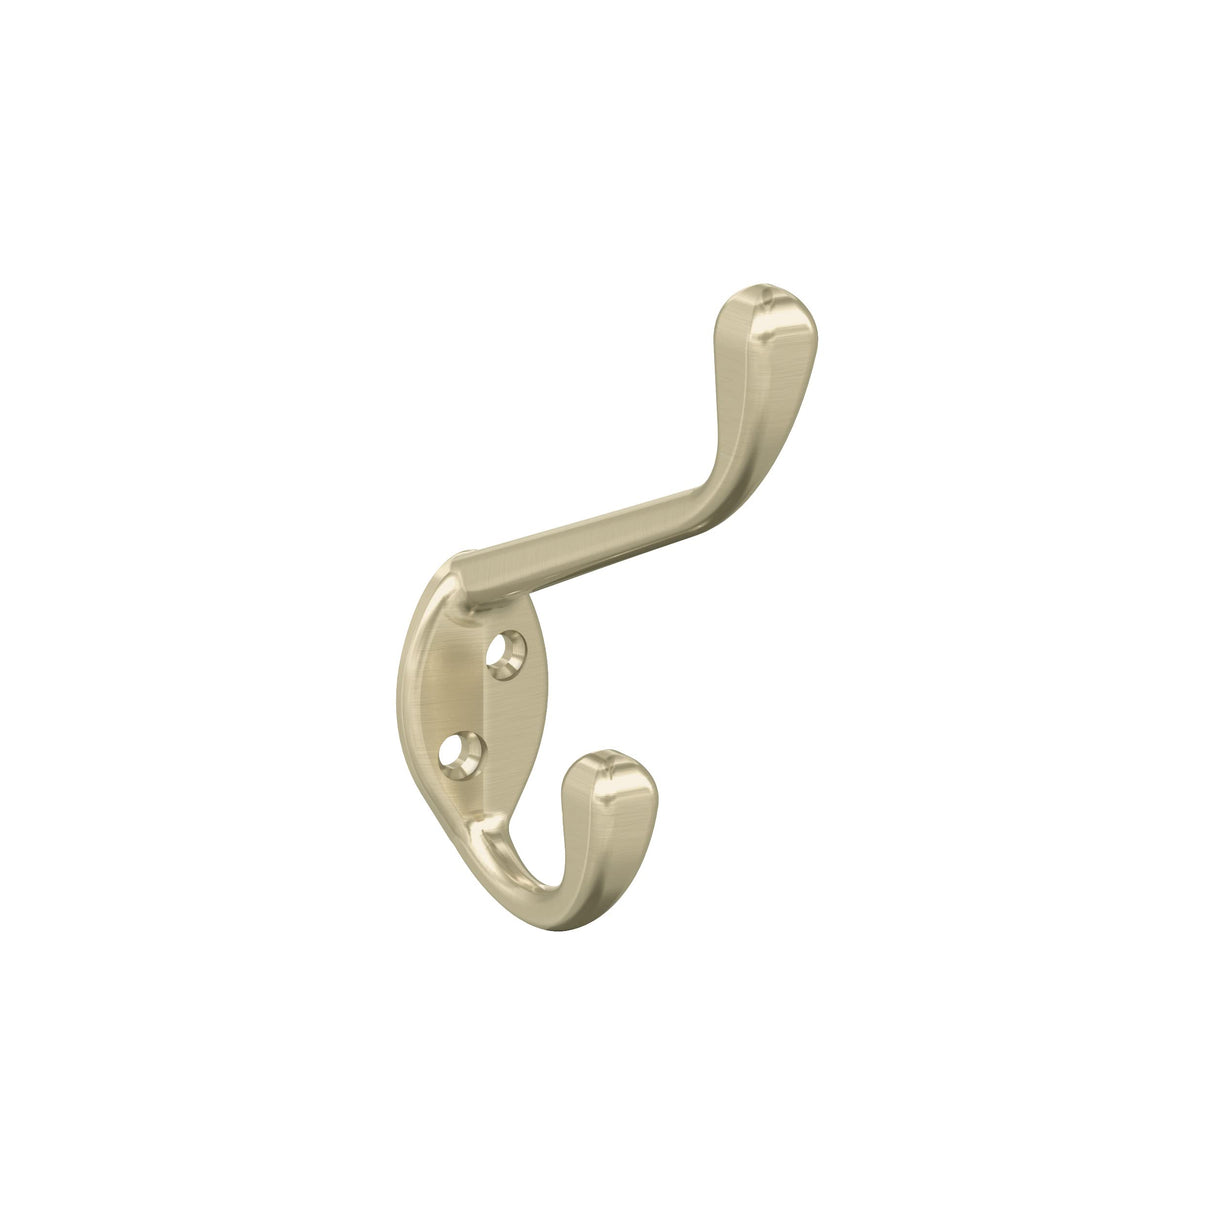 Amerock H55451BBZ Noble Double Prong Decorative Wall Hook Golden Champagne Hook for Coats, Hats, Backpacks, Bags Hooks for Bathroom, Bedroom, Closet, Entryway, Laundry Room, Office